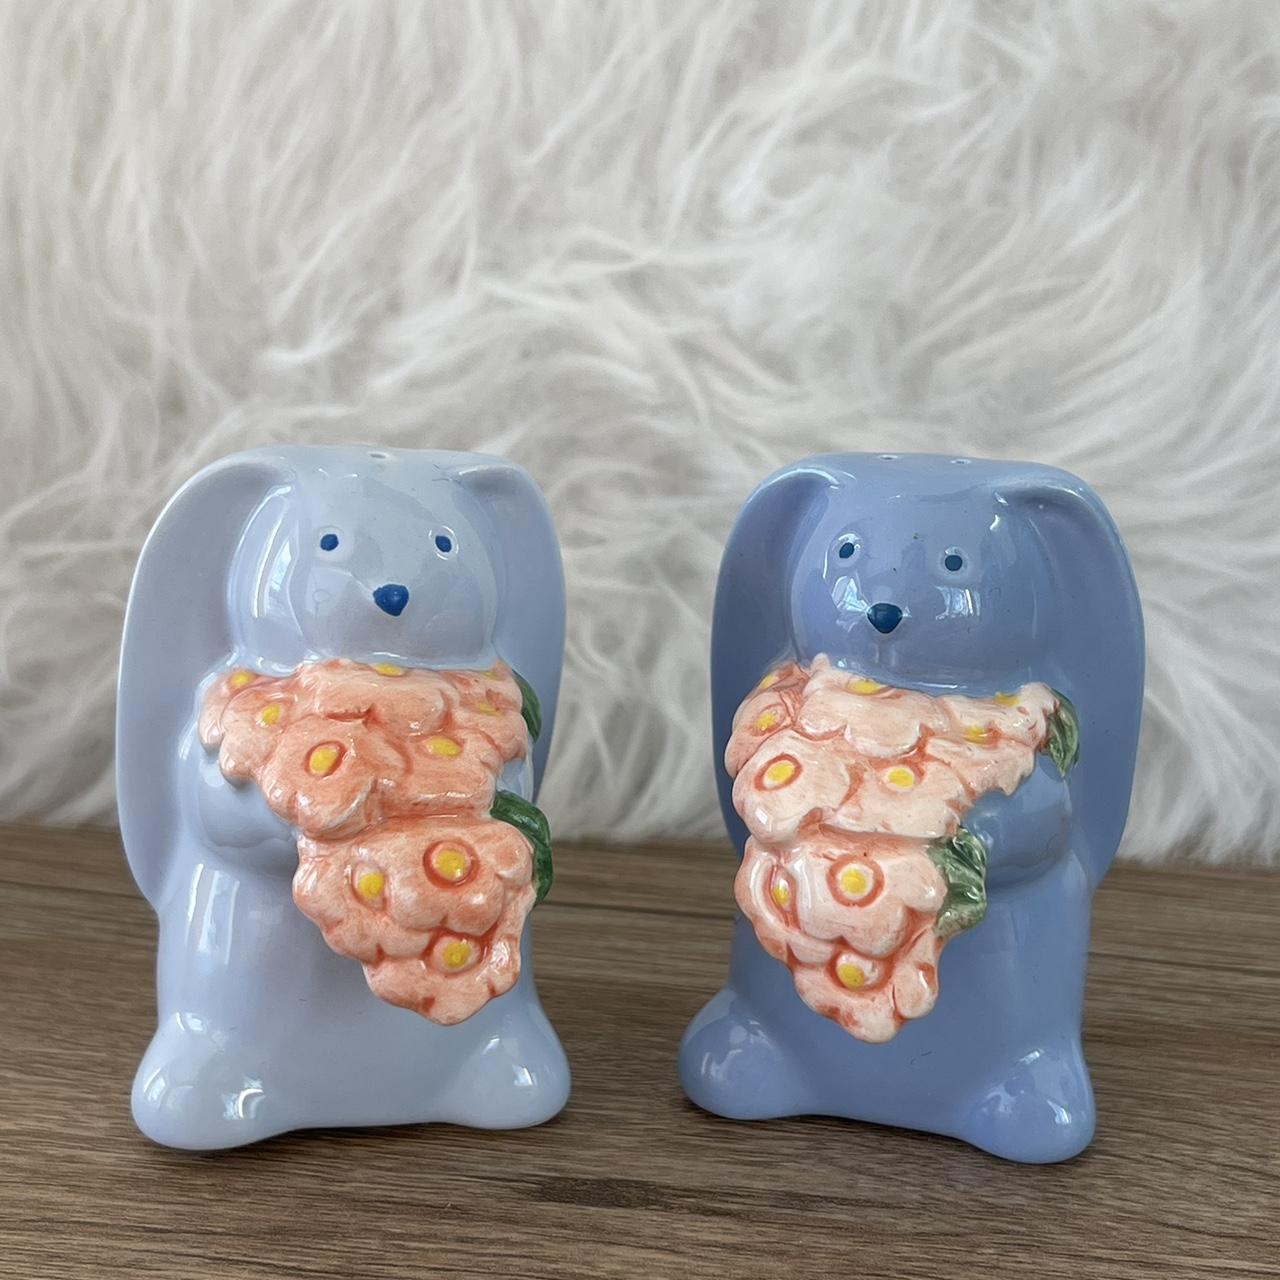 White and blue porcelain elephants small salt and pepper shakers.